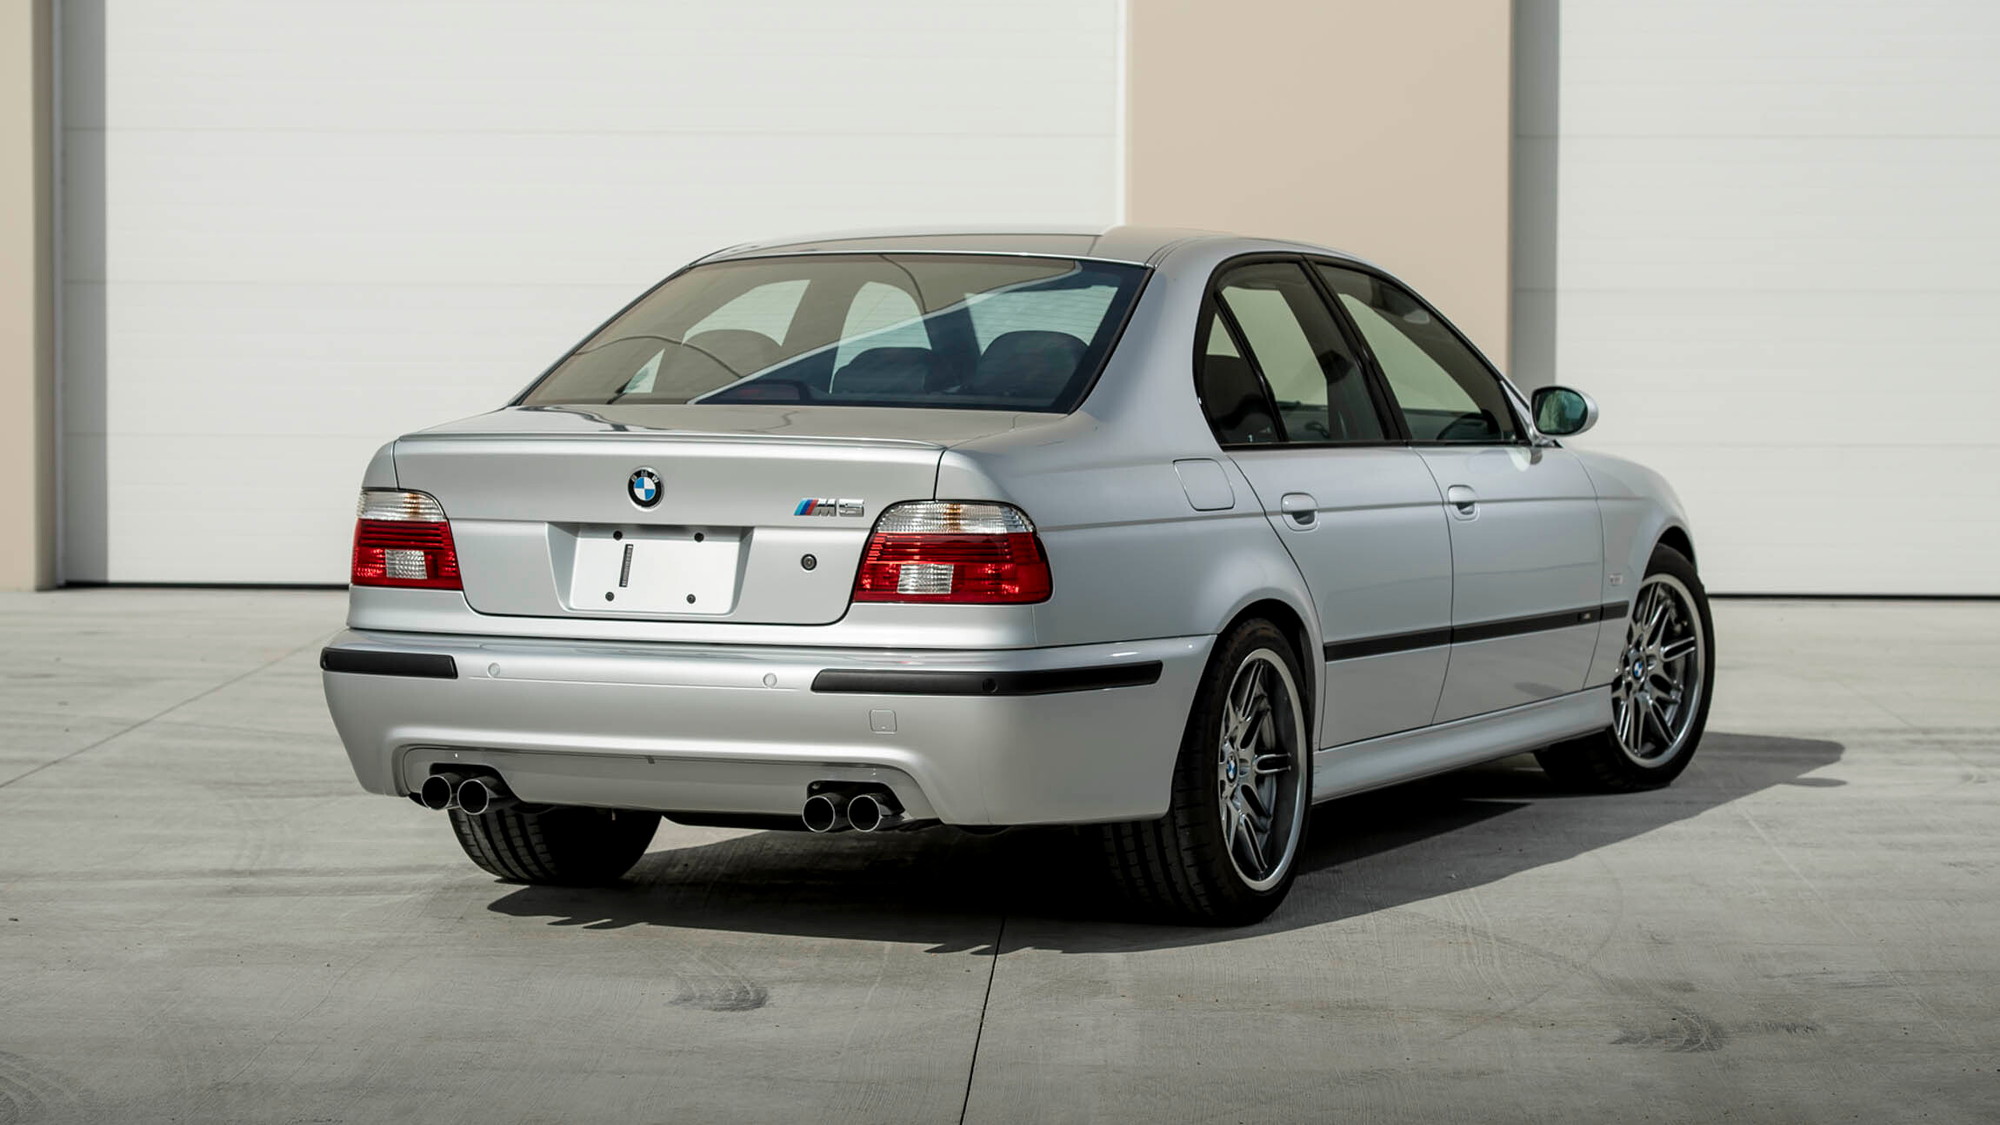 2002 BMW M5 heads to Gooding auction